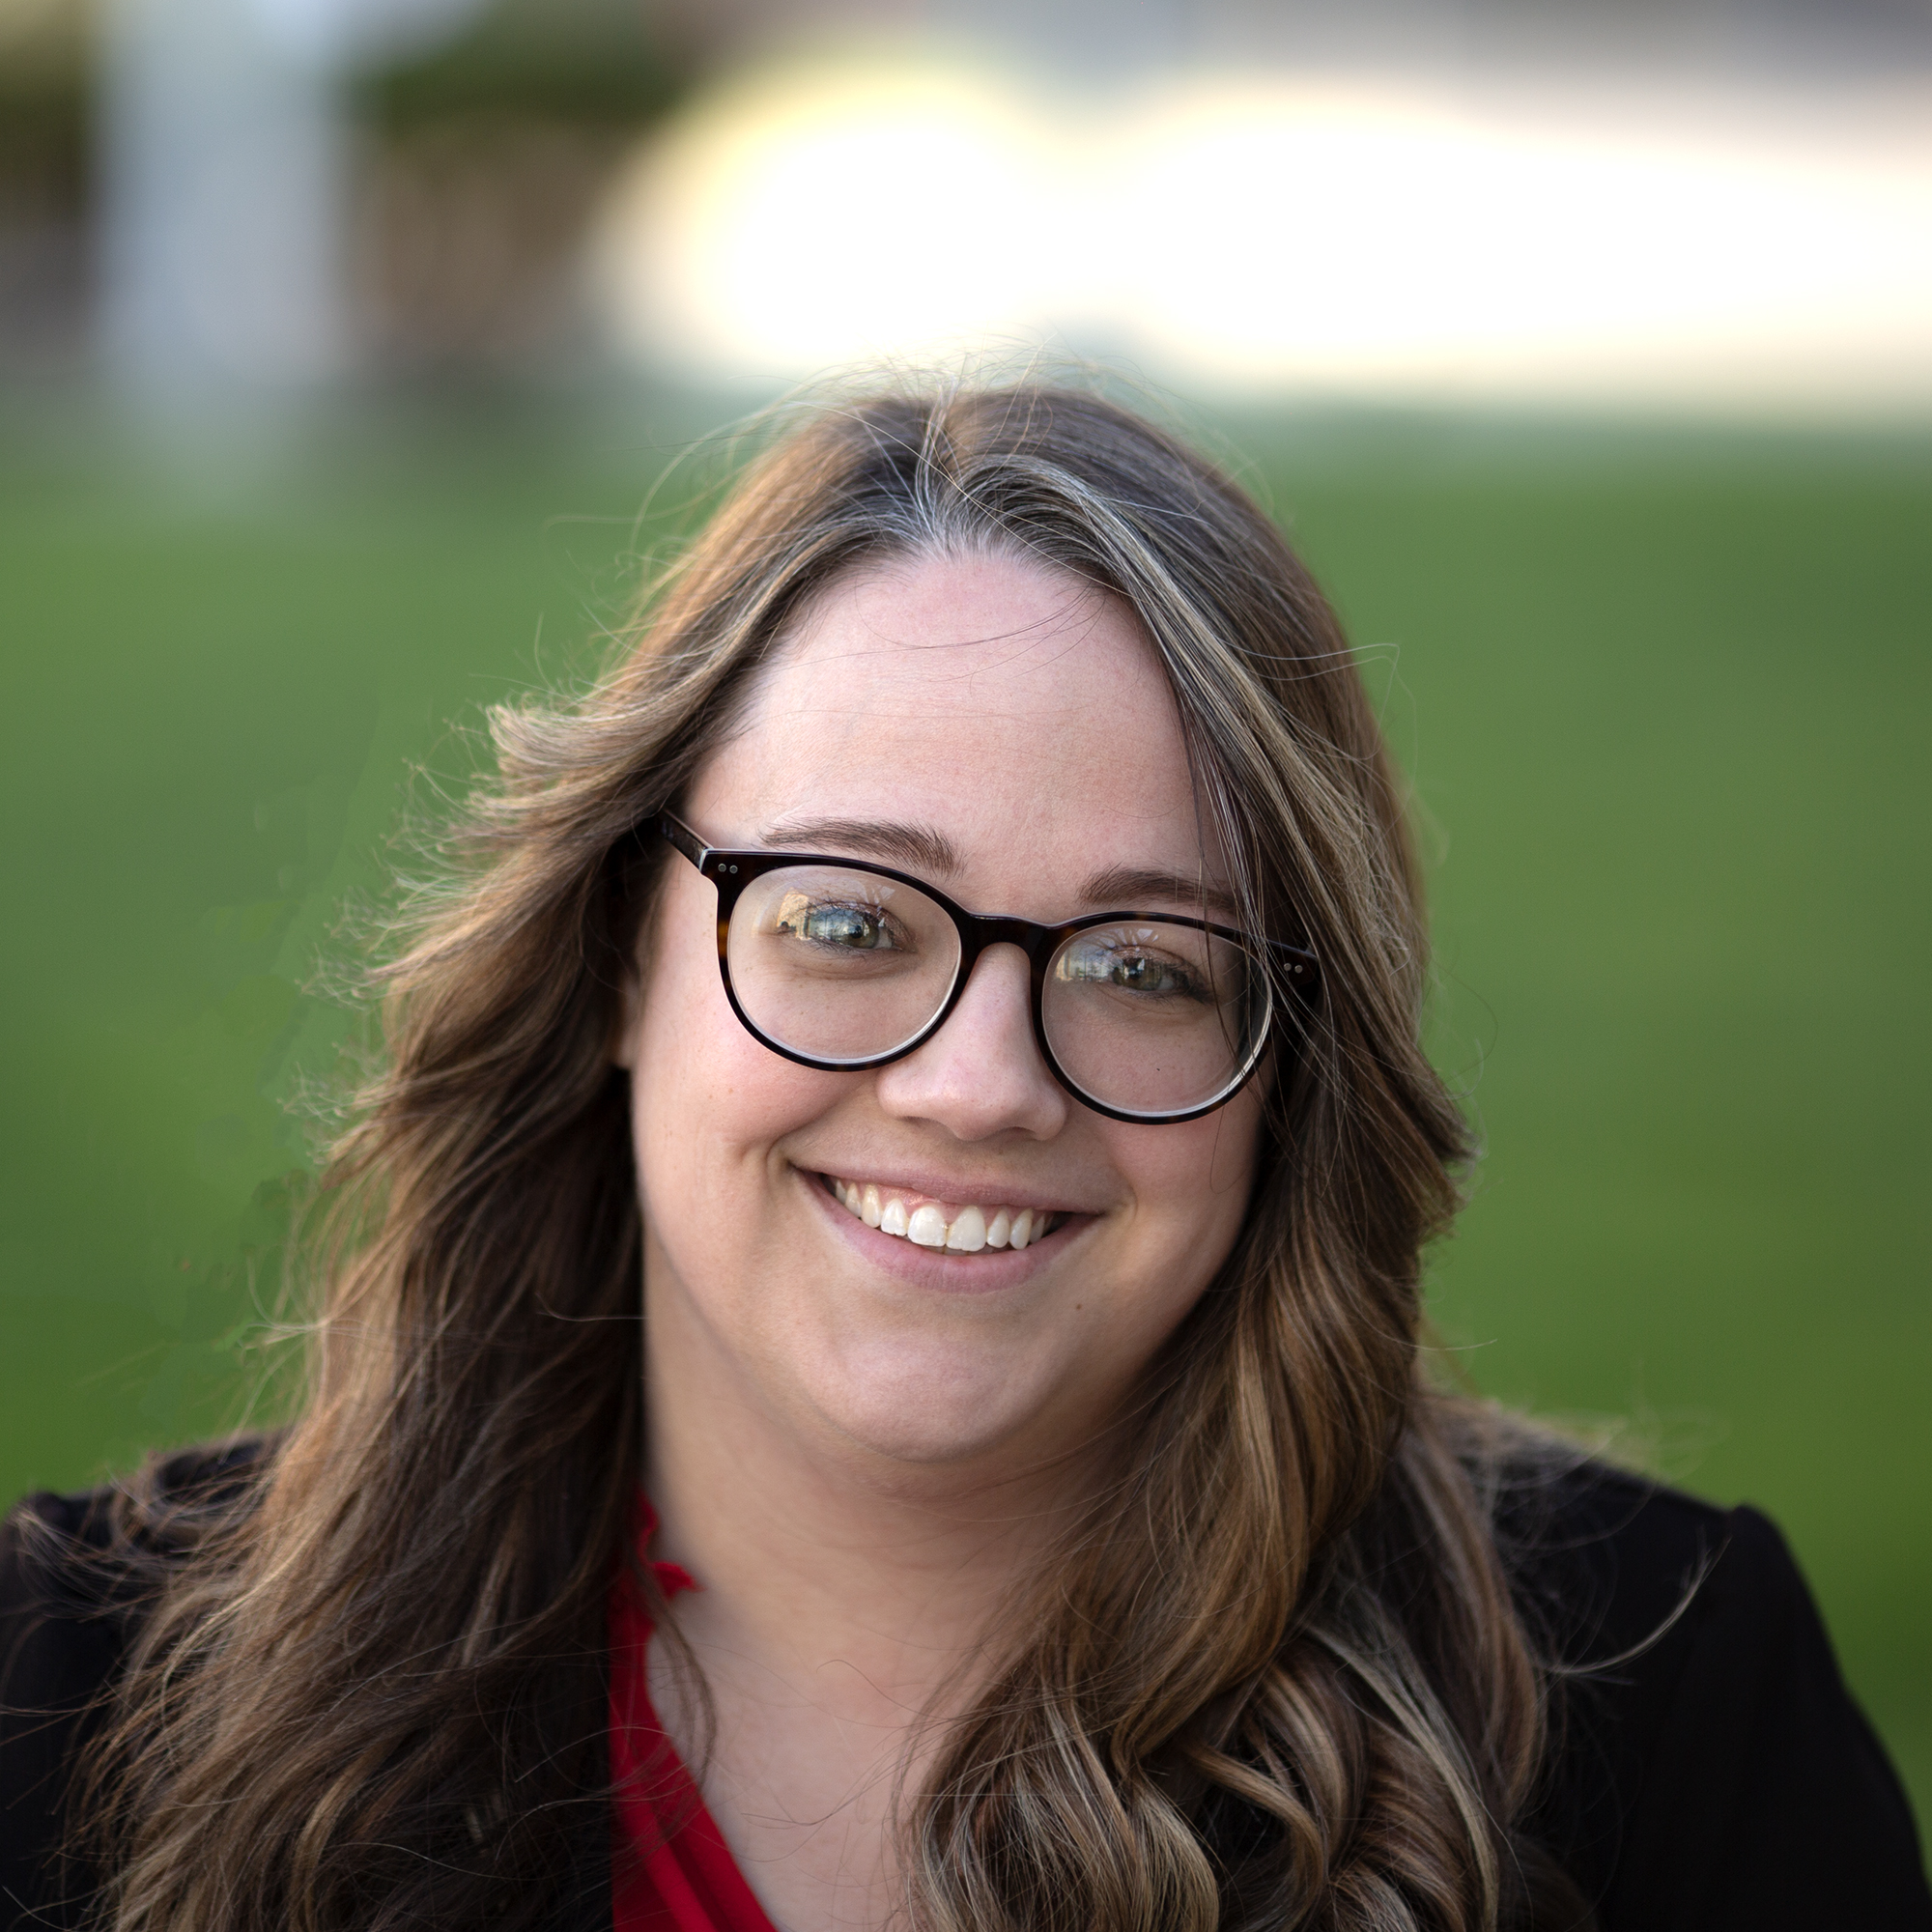 Steph is a white woman in her late 20s with long brown curled hair. She has on round plastic glasses and a blazer. She is smiling in front of a blurred background.